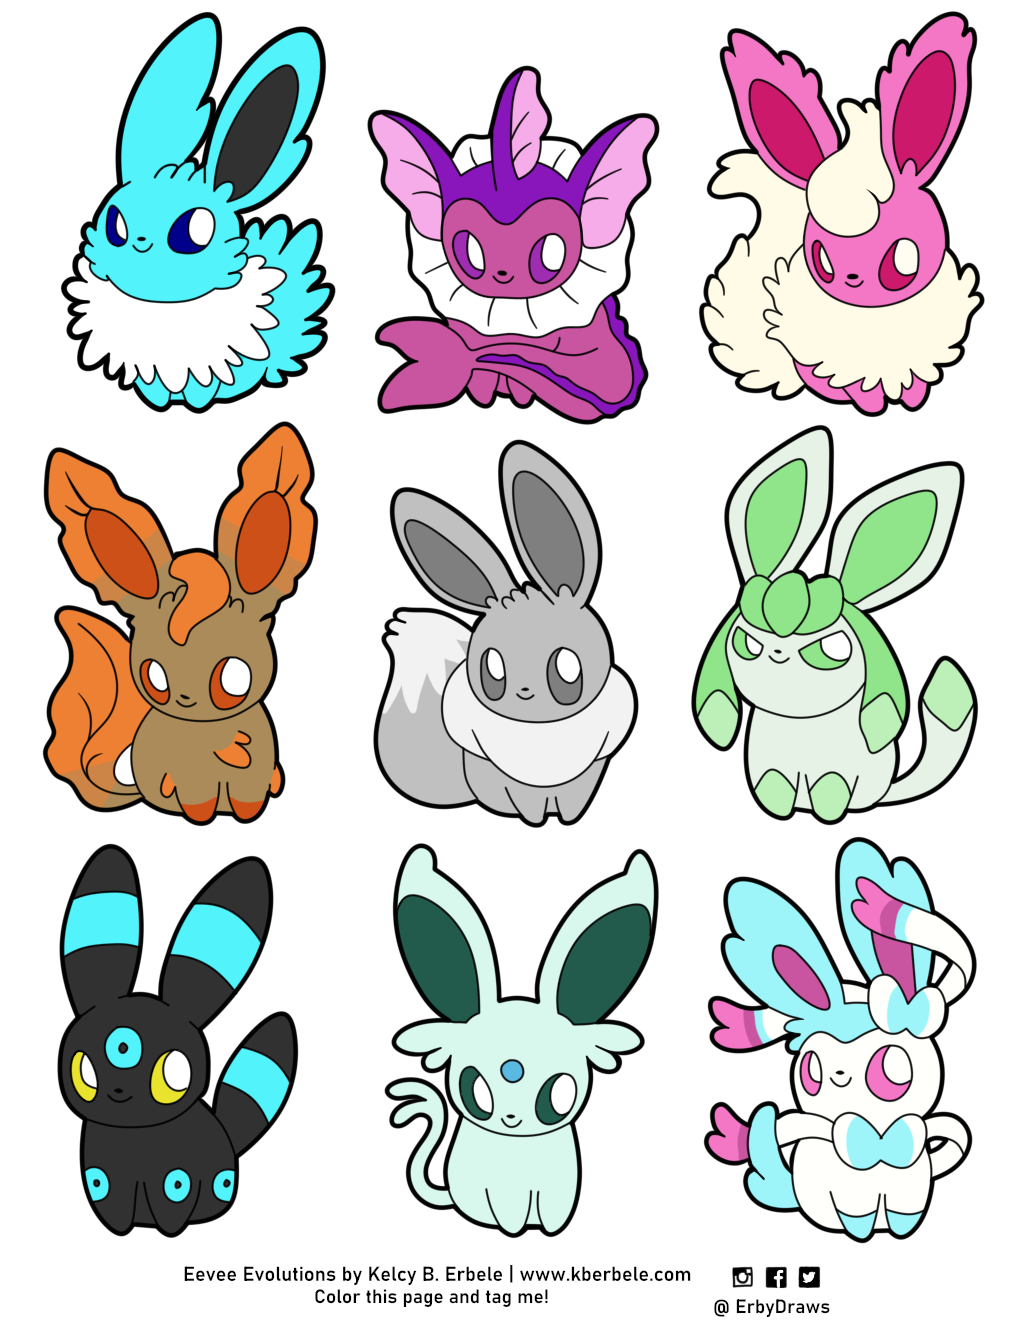 Eeveelutions alt shiny colors by reb on